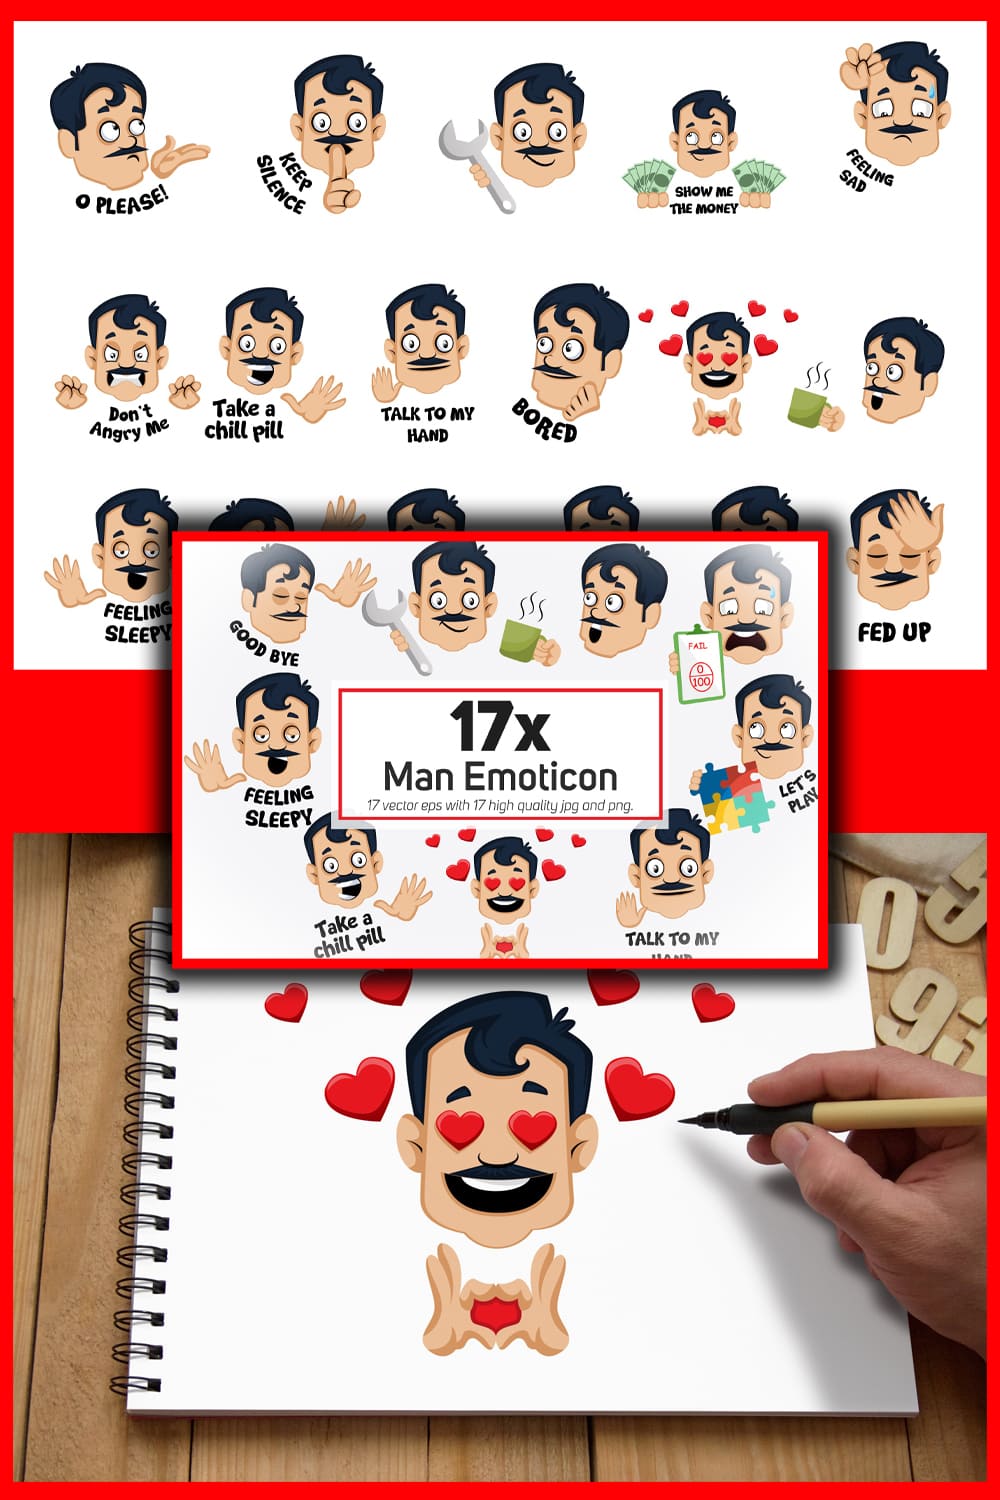 Man emoticon or stickers character collection of pinterest.